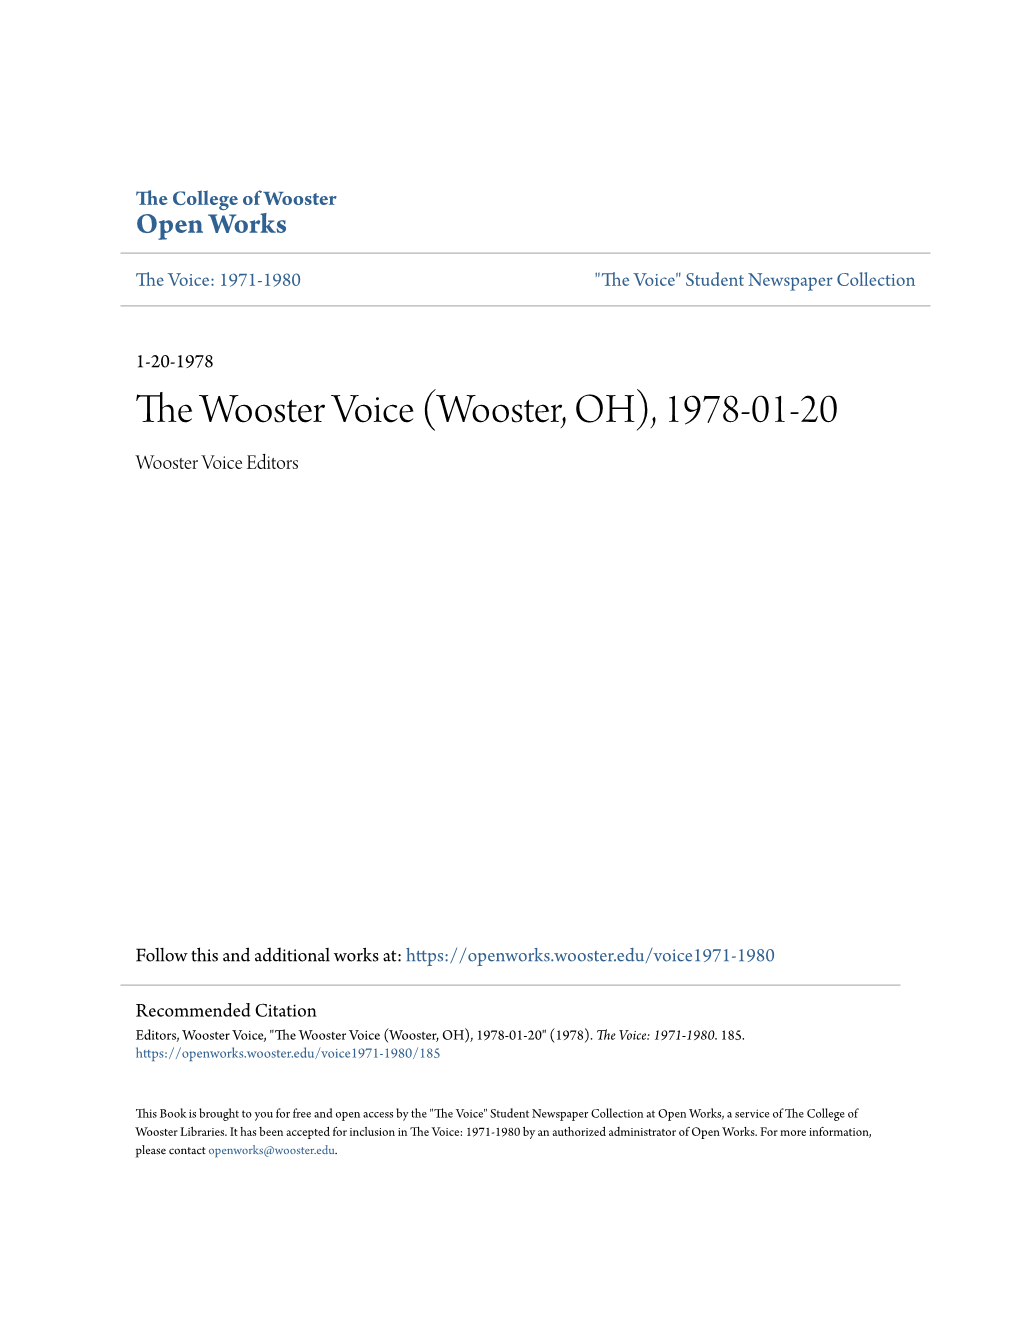 The WOOSTER VOICE Welcomes All Signed Letters to the Editor from Students, Faculty, Liberation." Human Liberation, Applying to All Humans, Male and Female Alike